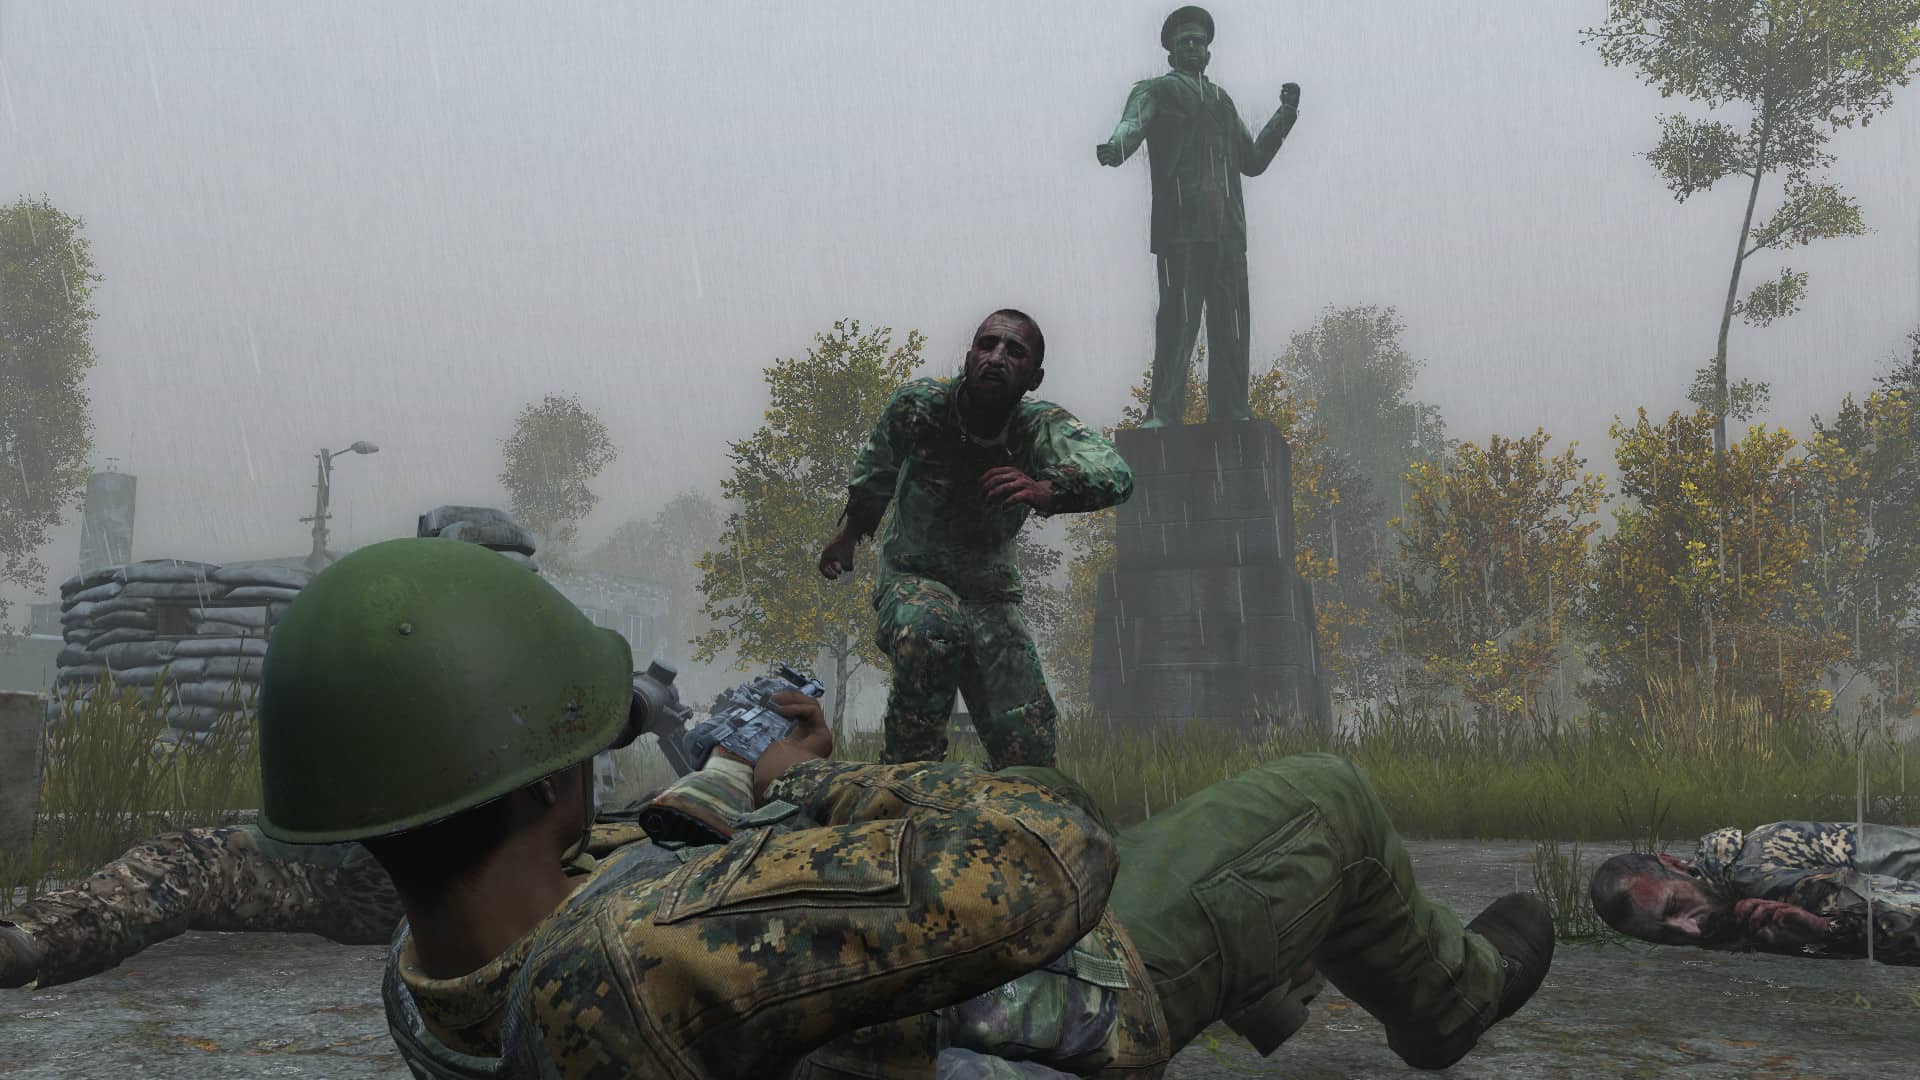 A survivor battles one of the infected in DayZ.